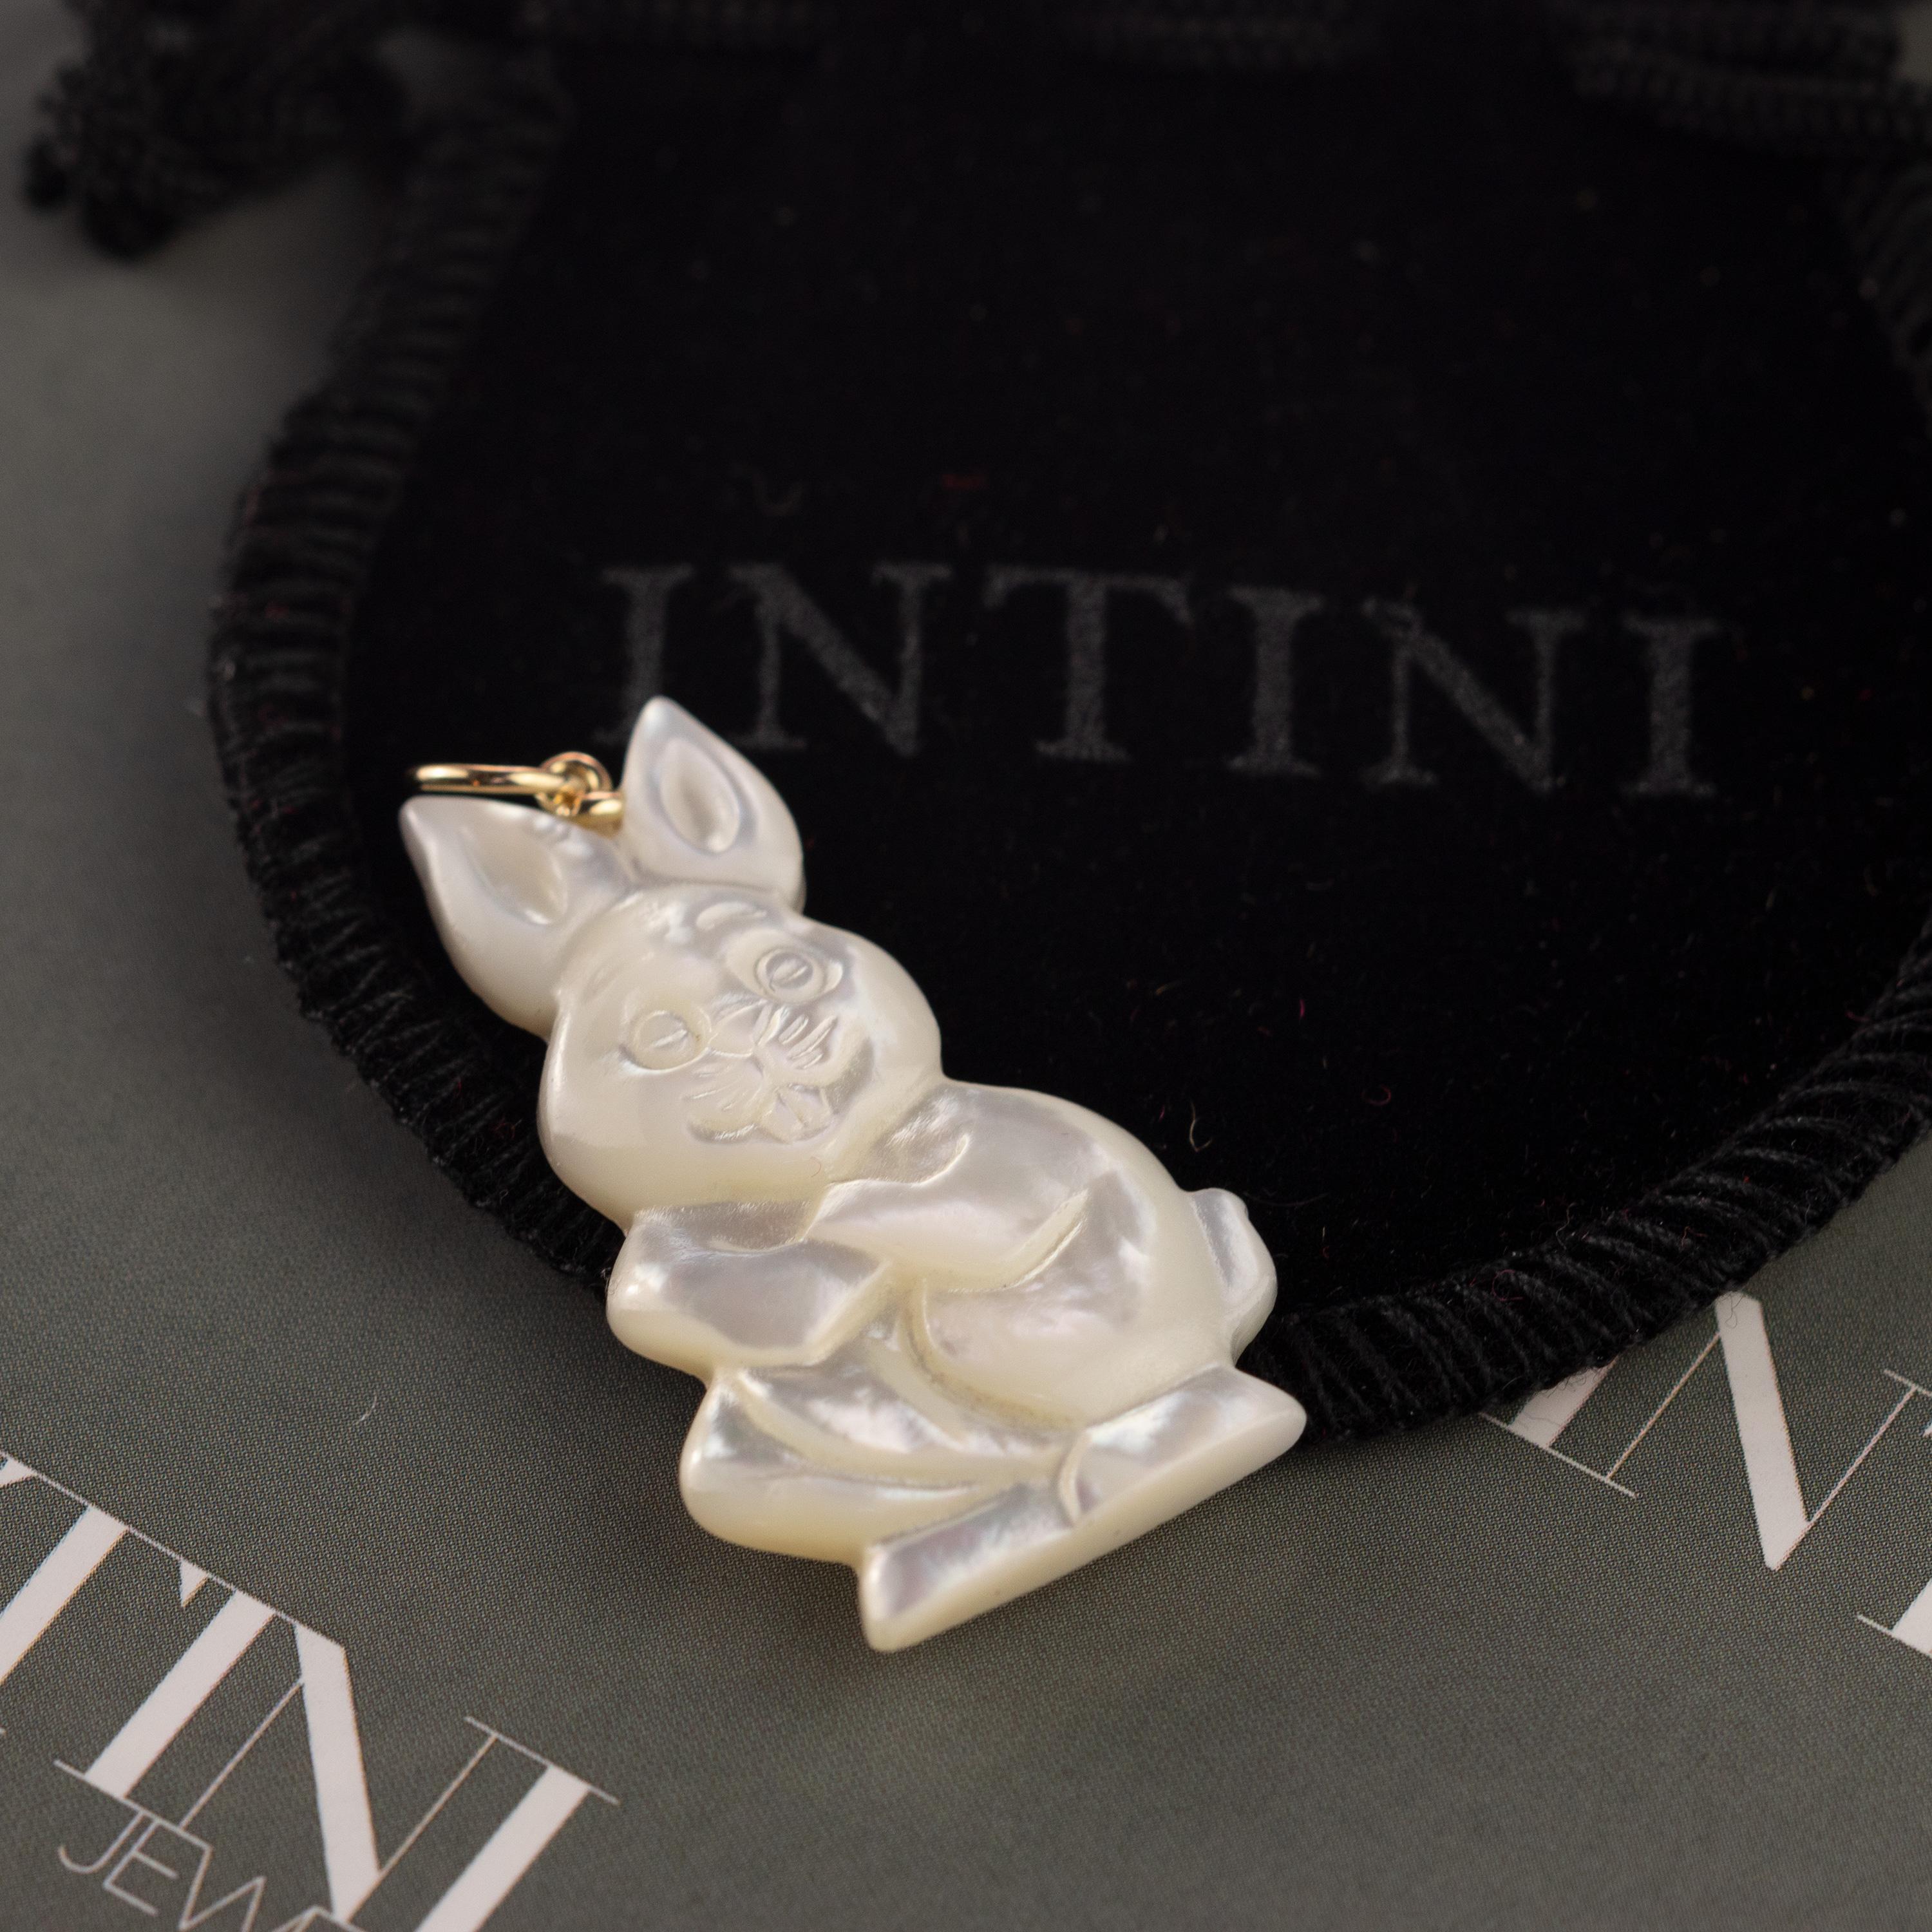 Stunning unique easter piece. Mother of pearl pendant with an amazing rabbit / bunny shaped form. Marvelous jewel with 18 karat yellow gold setting.

Mother of Pearl brings the gentle healing power of the sea. It is a stress relieving stone;